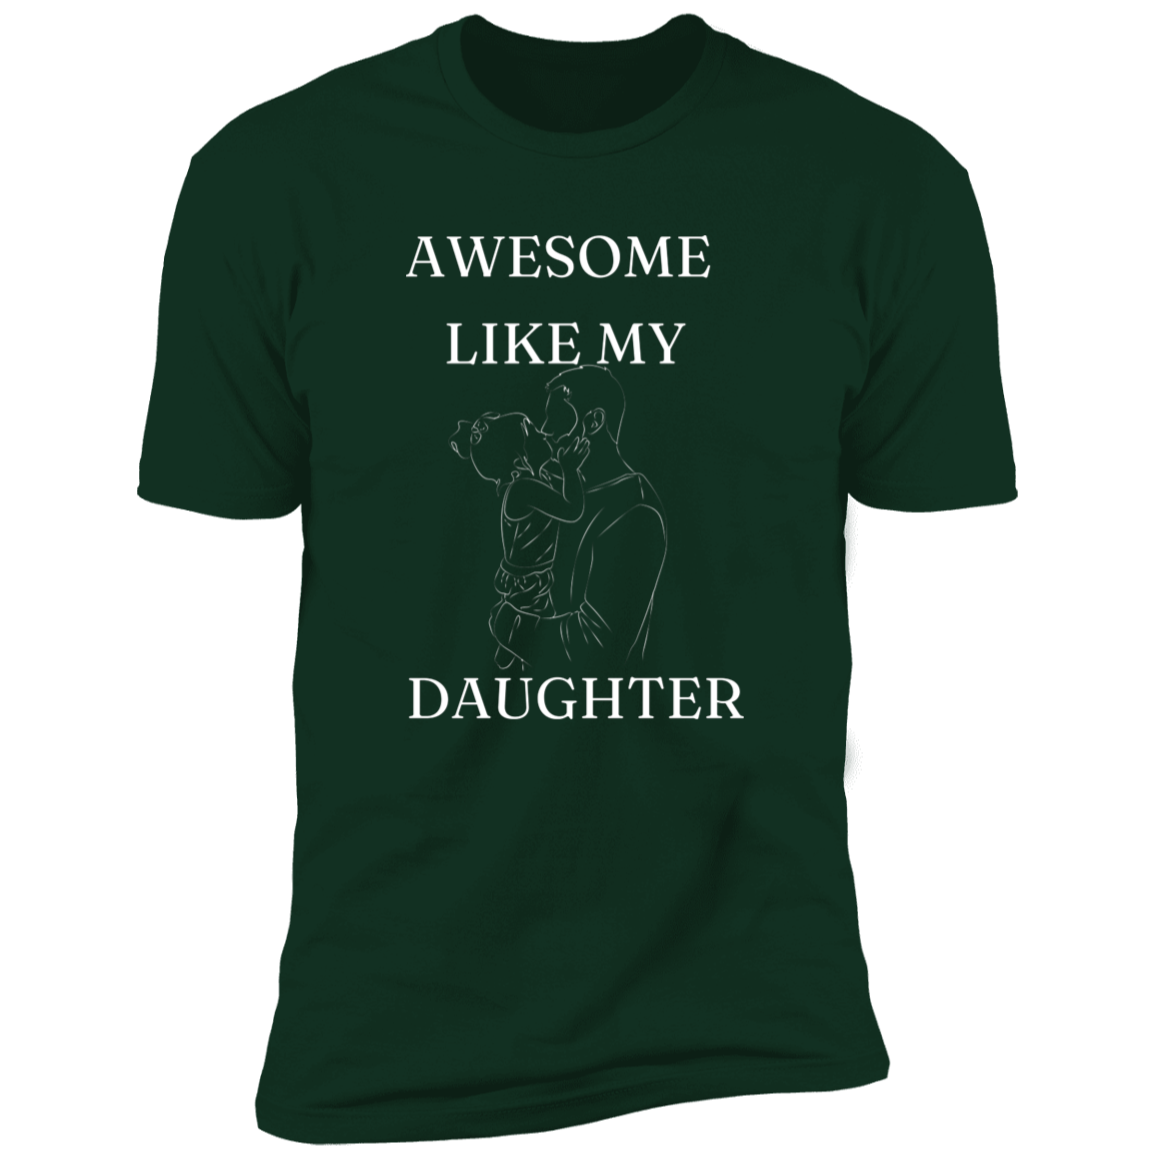 AWESOME LIKE MY DAUGHTER T-SHIRT WHT